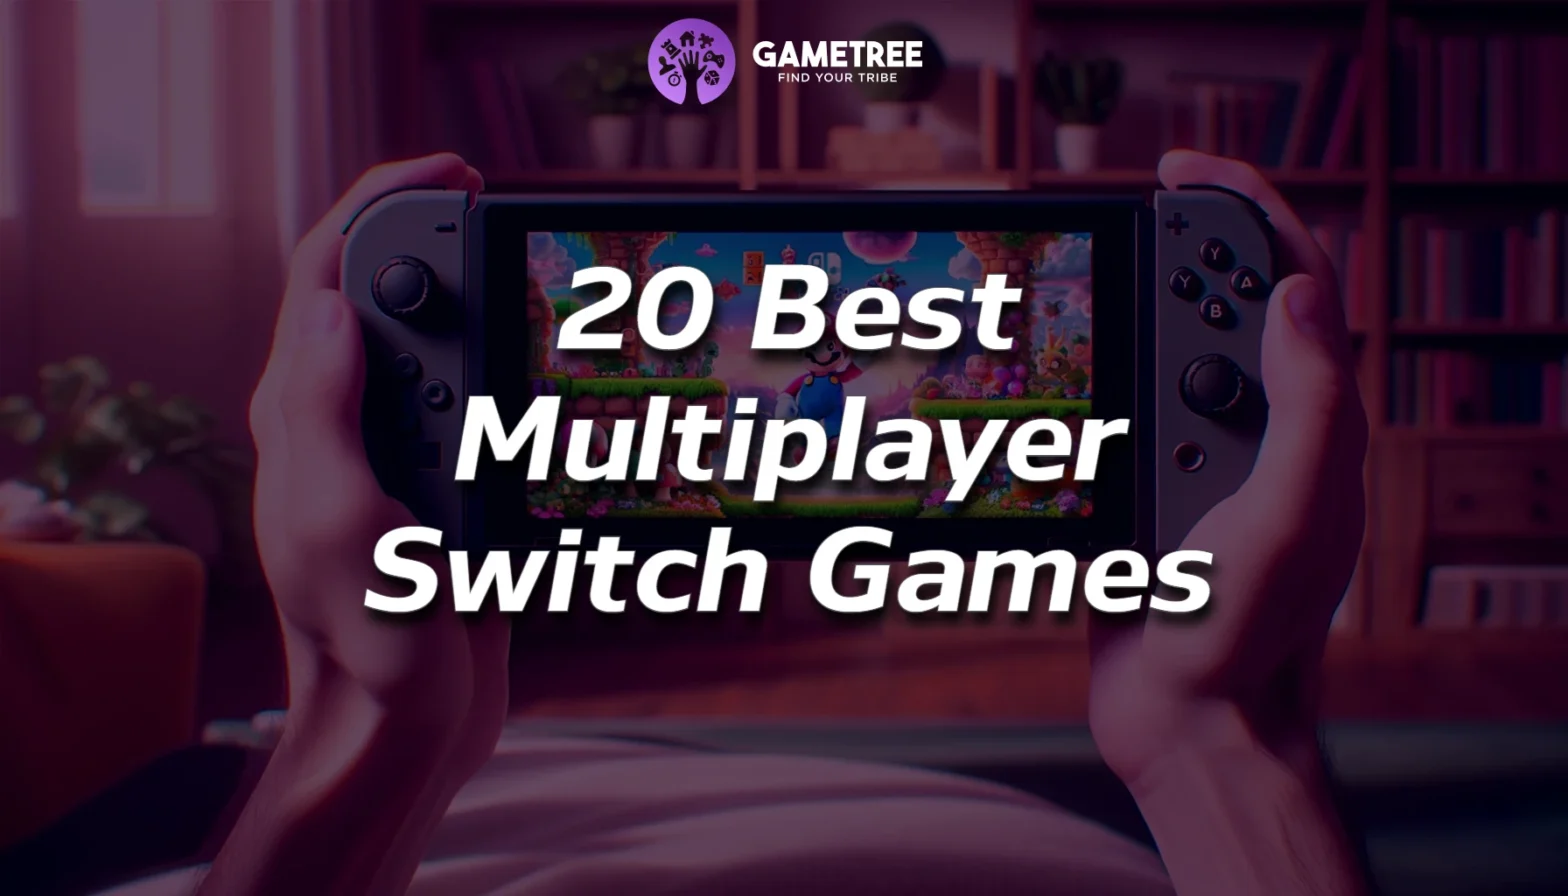 List of 20 best multiplayer Switch games